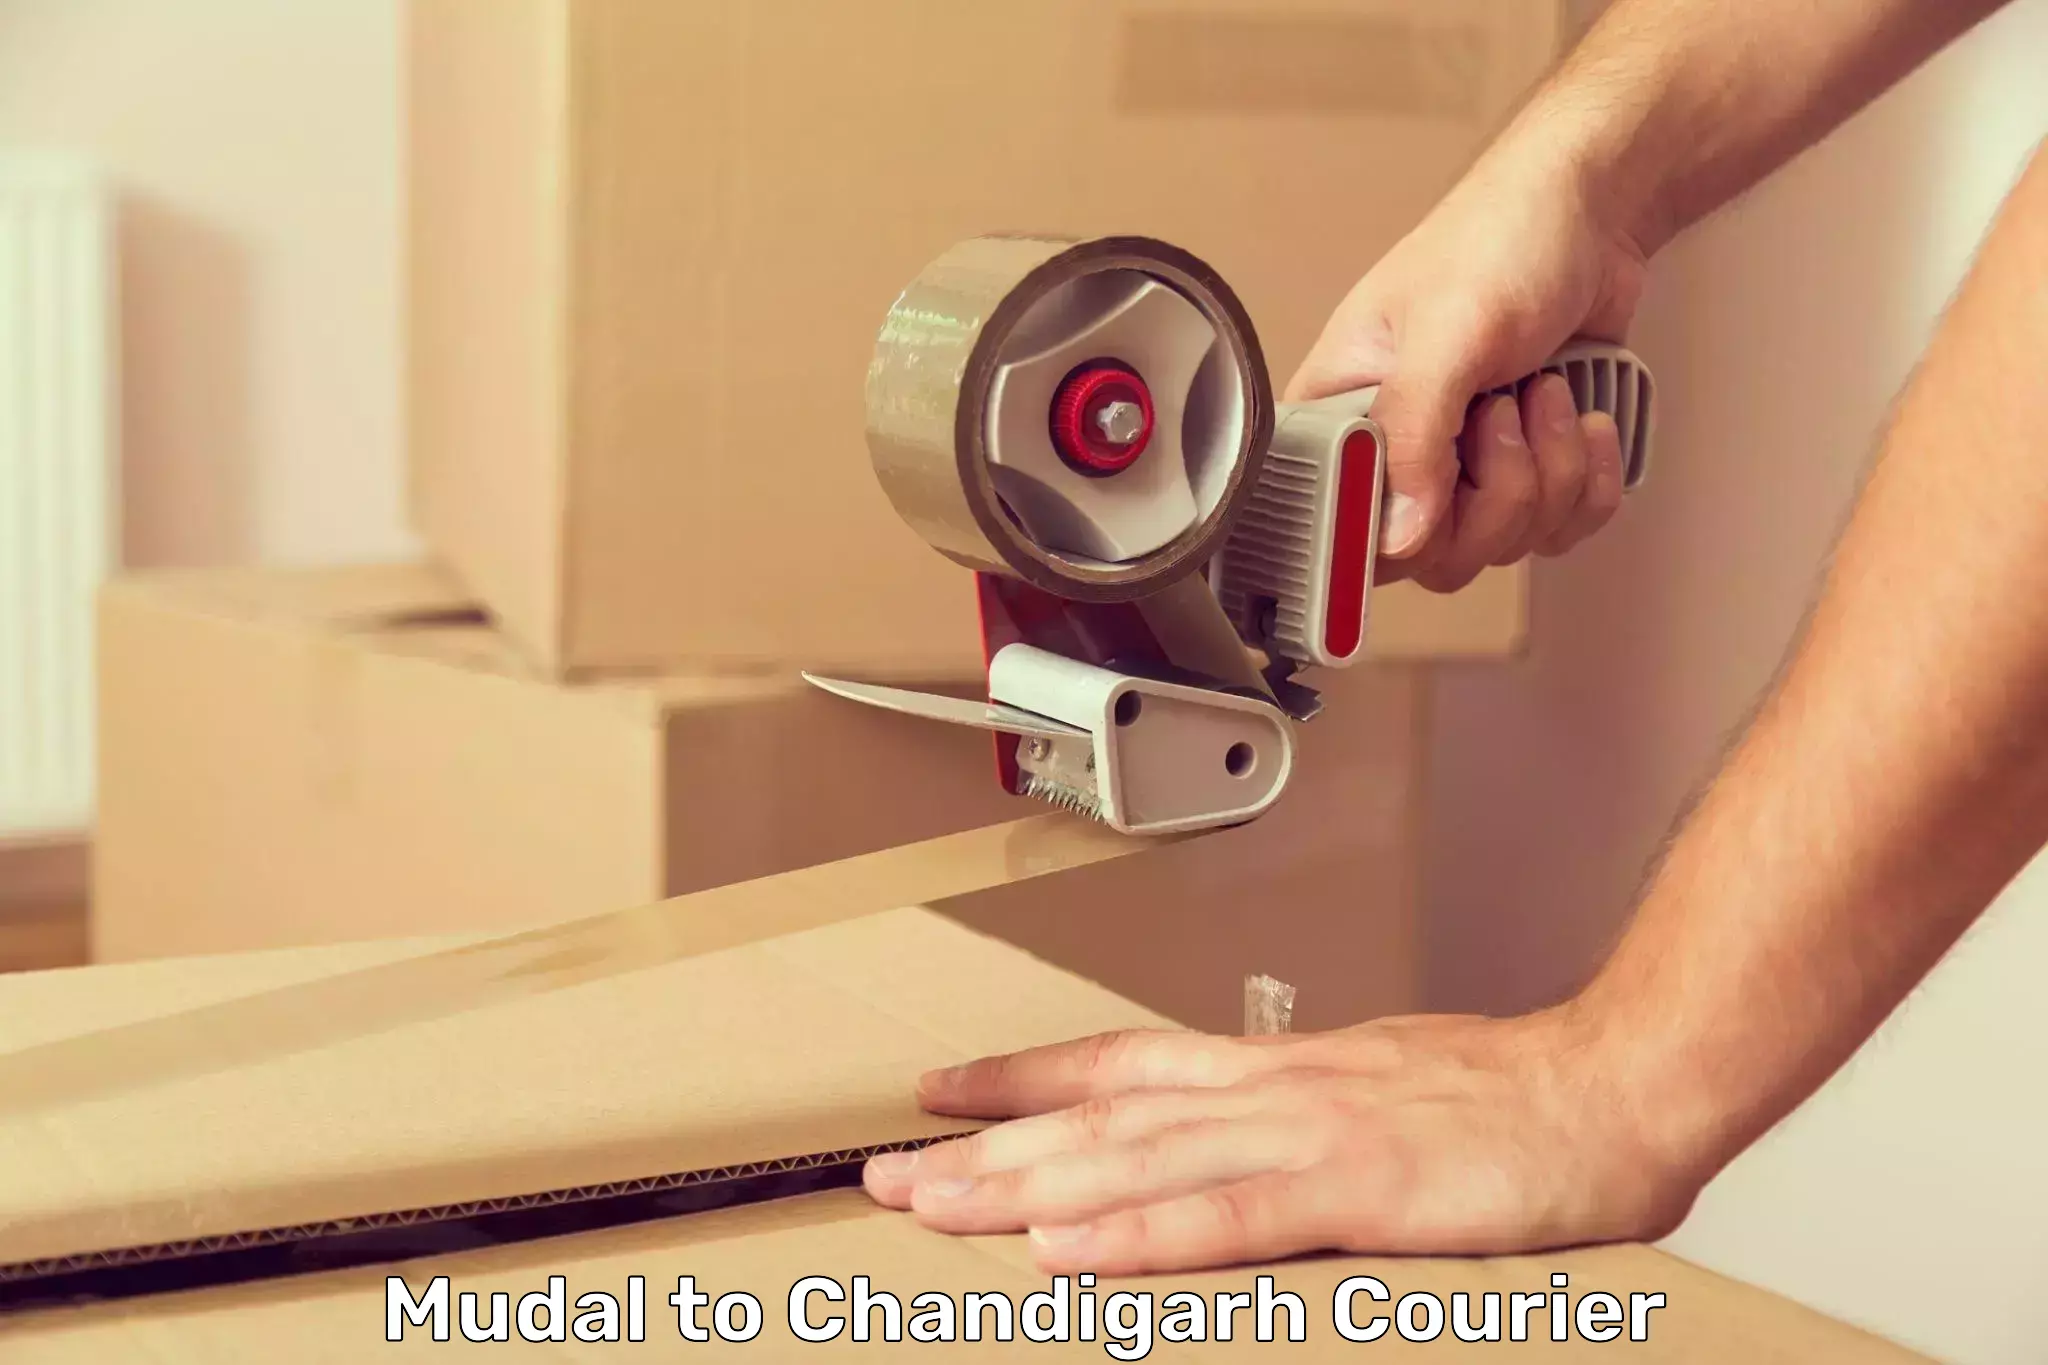 Flexible delivery scheduling Mudal to Chandigarh